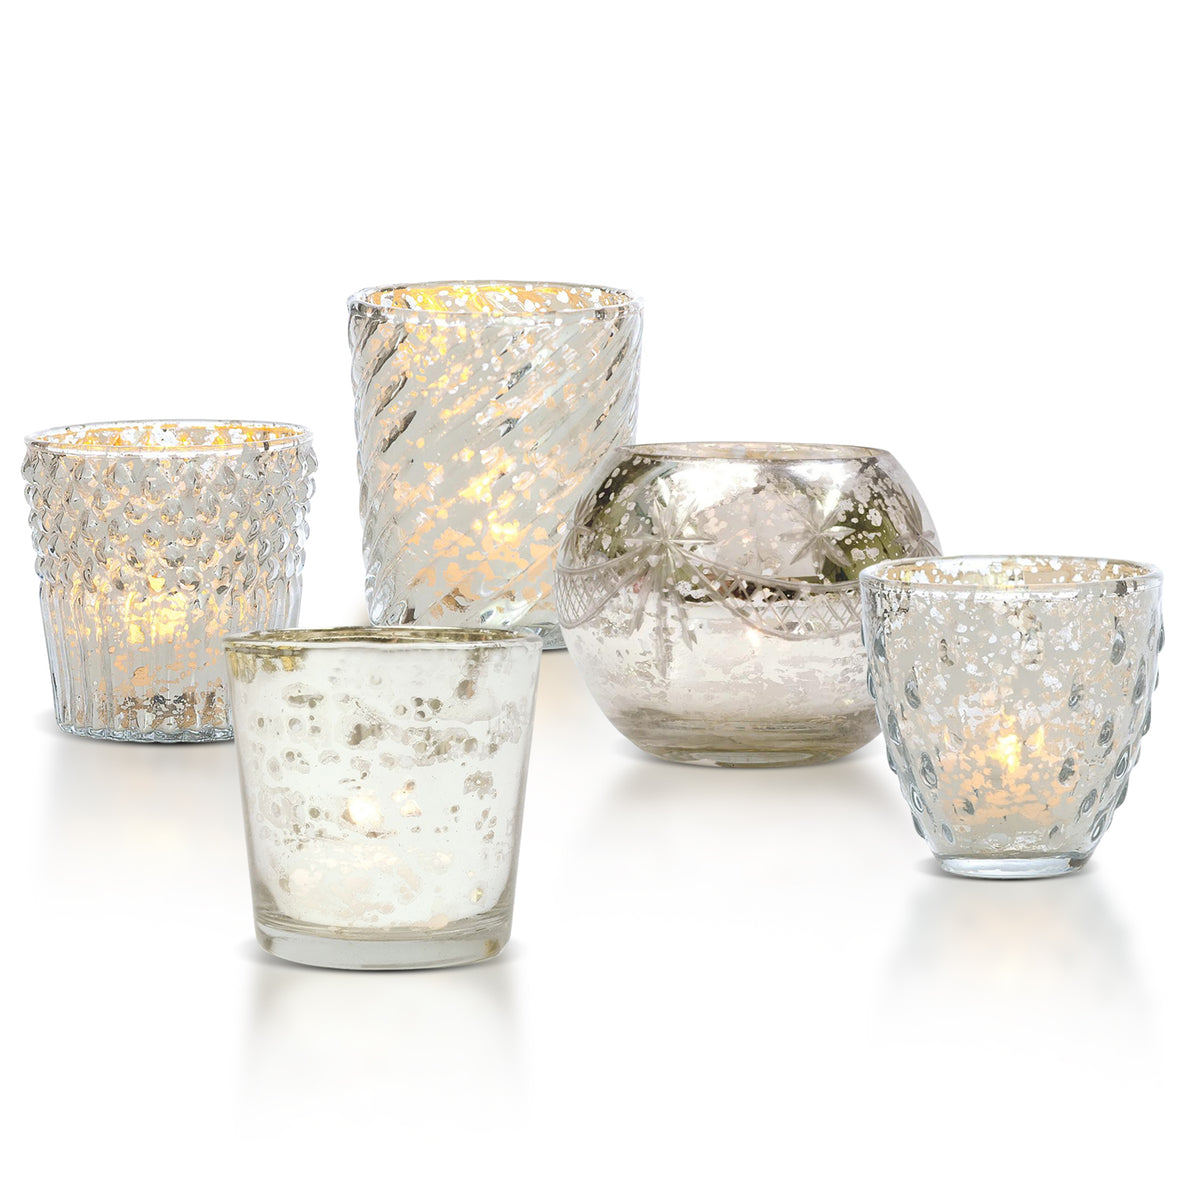 Vintage Love Silver Mercury Glass Tea Light Votive Candle Holders (5 PACK, Assorted Styles)